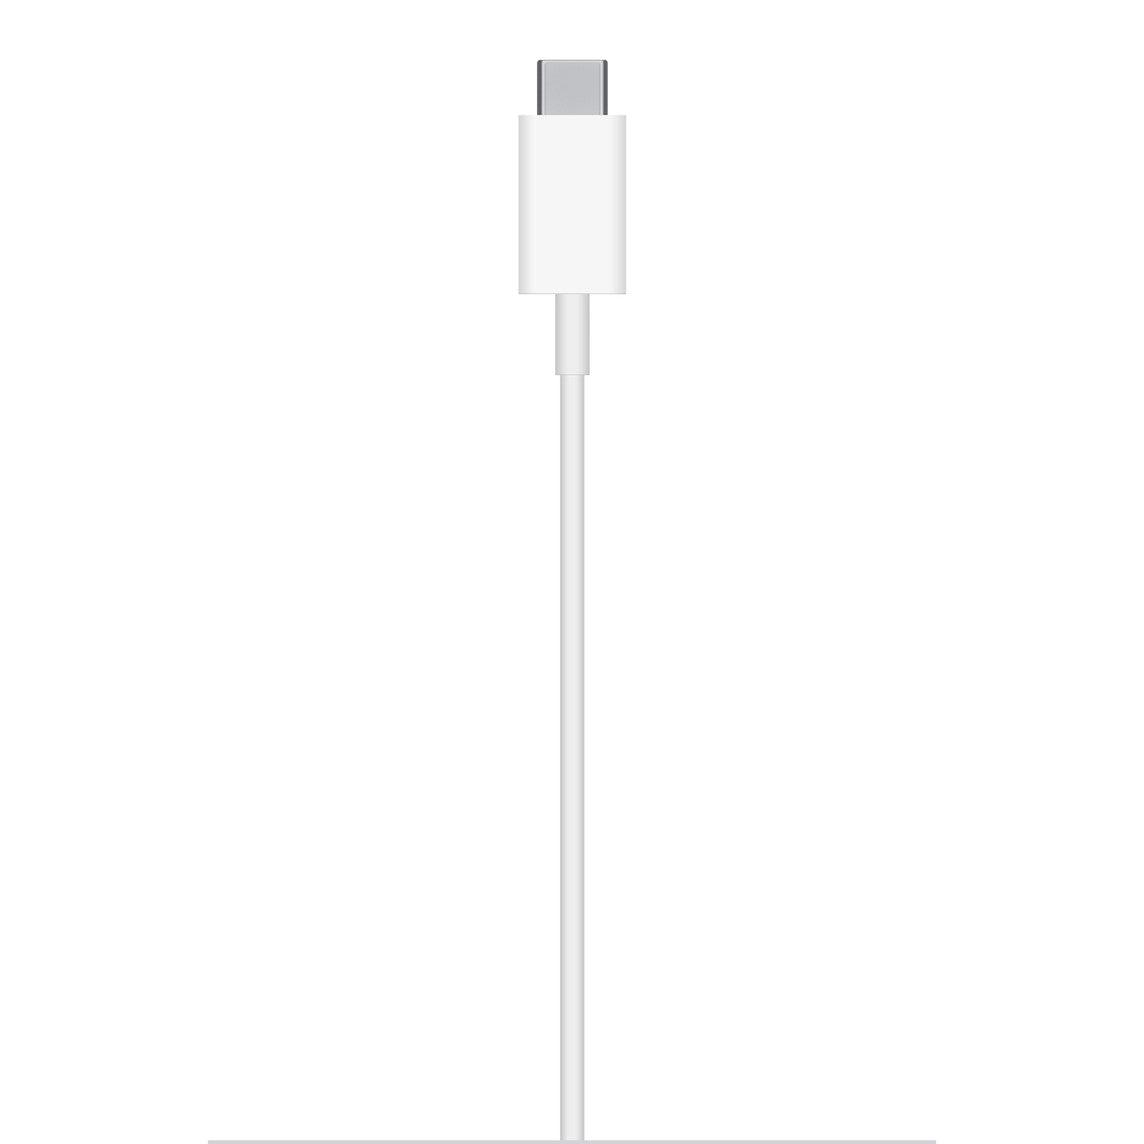 Apple MagSafe Charger For iPhone & AirPods - Apple MagSafe Charger For iPhone & AirPods - undefined Ennap.com